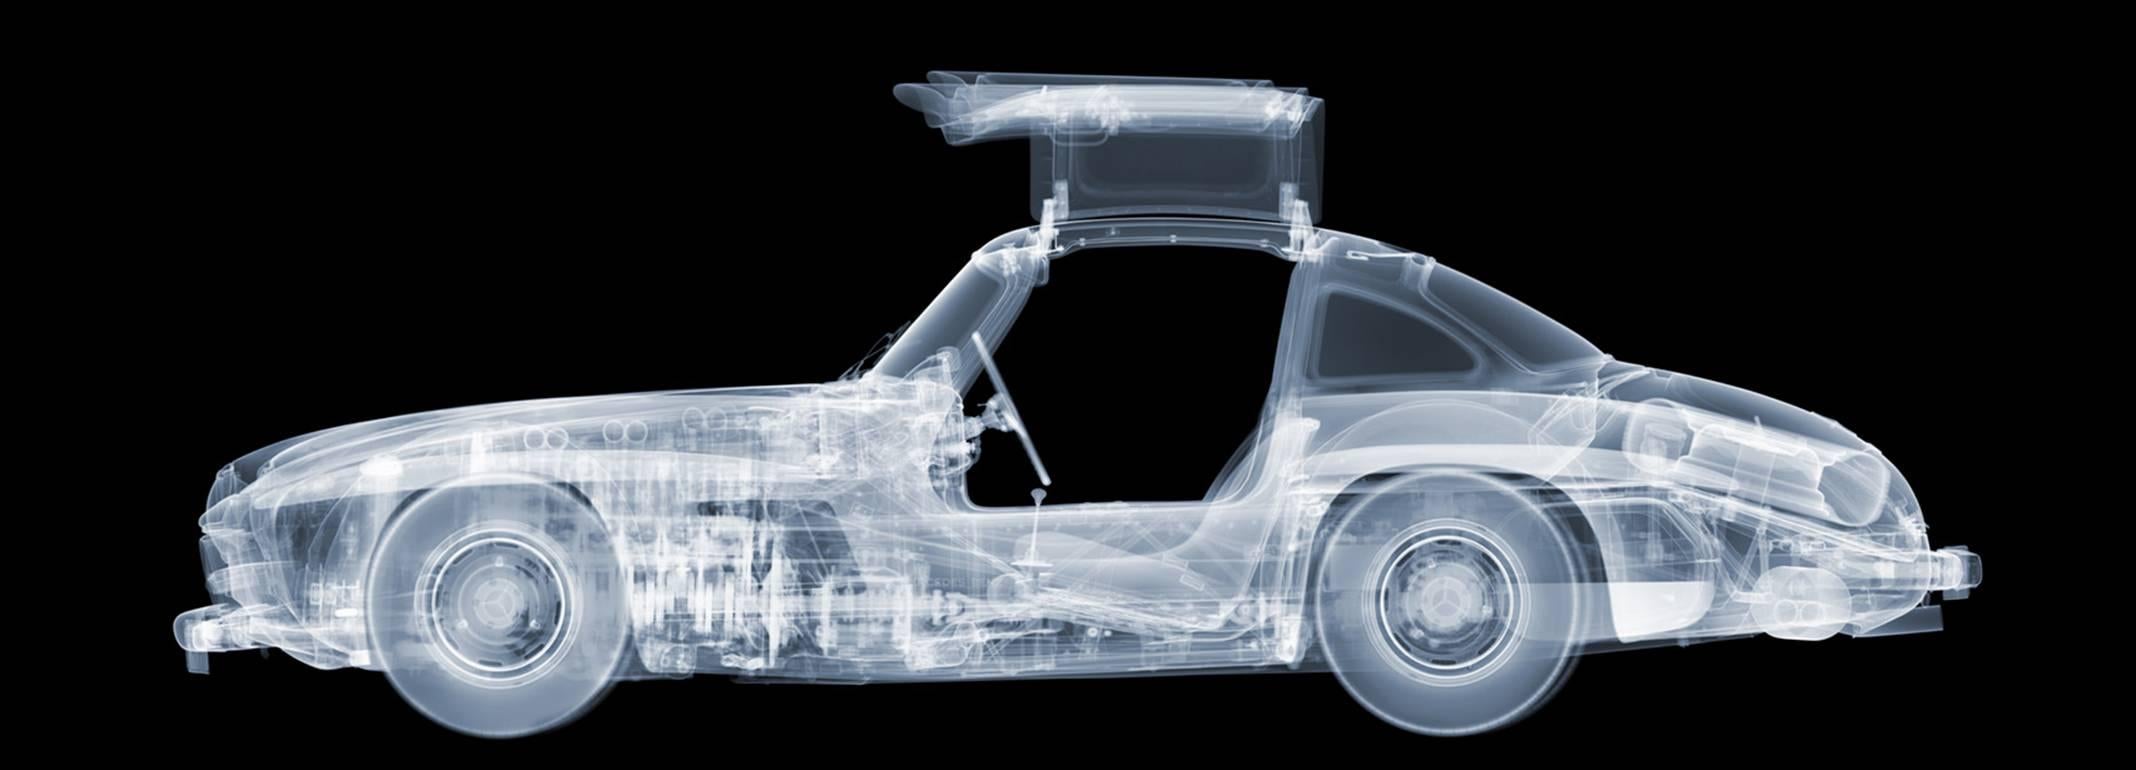 Nick Veasey Abstract Photograph - 1955 Mercedes 300 SL Gull-Wing